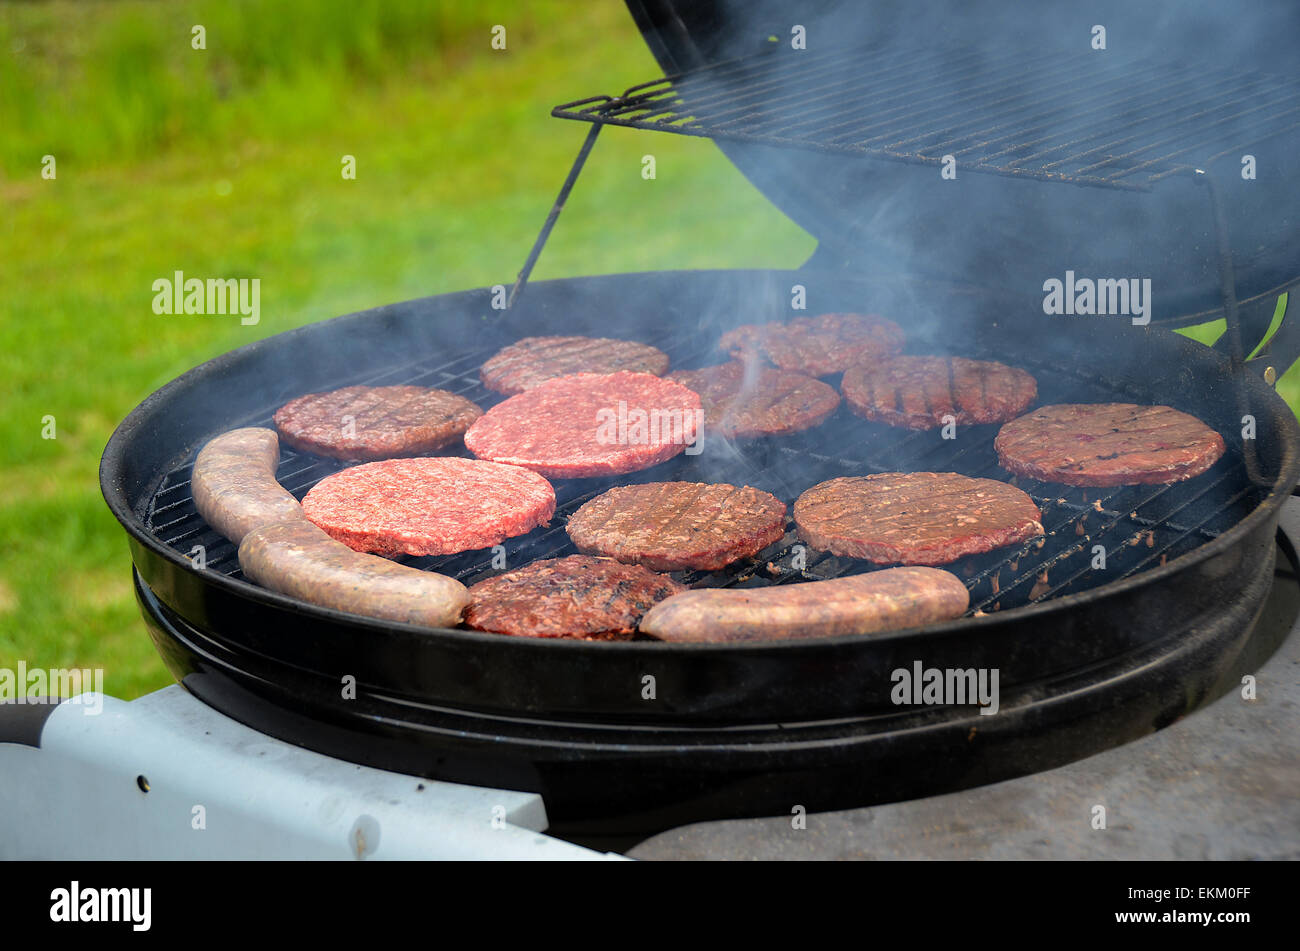 Hamburgers and brats cooking on a charcoal grill. Stock Photo